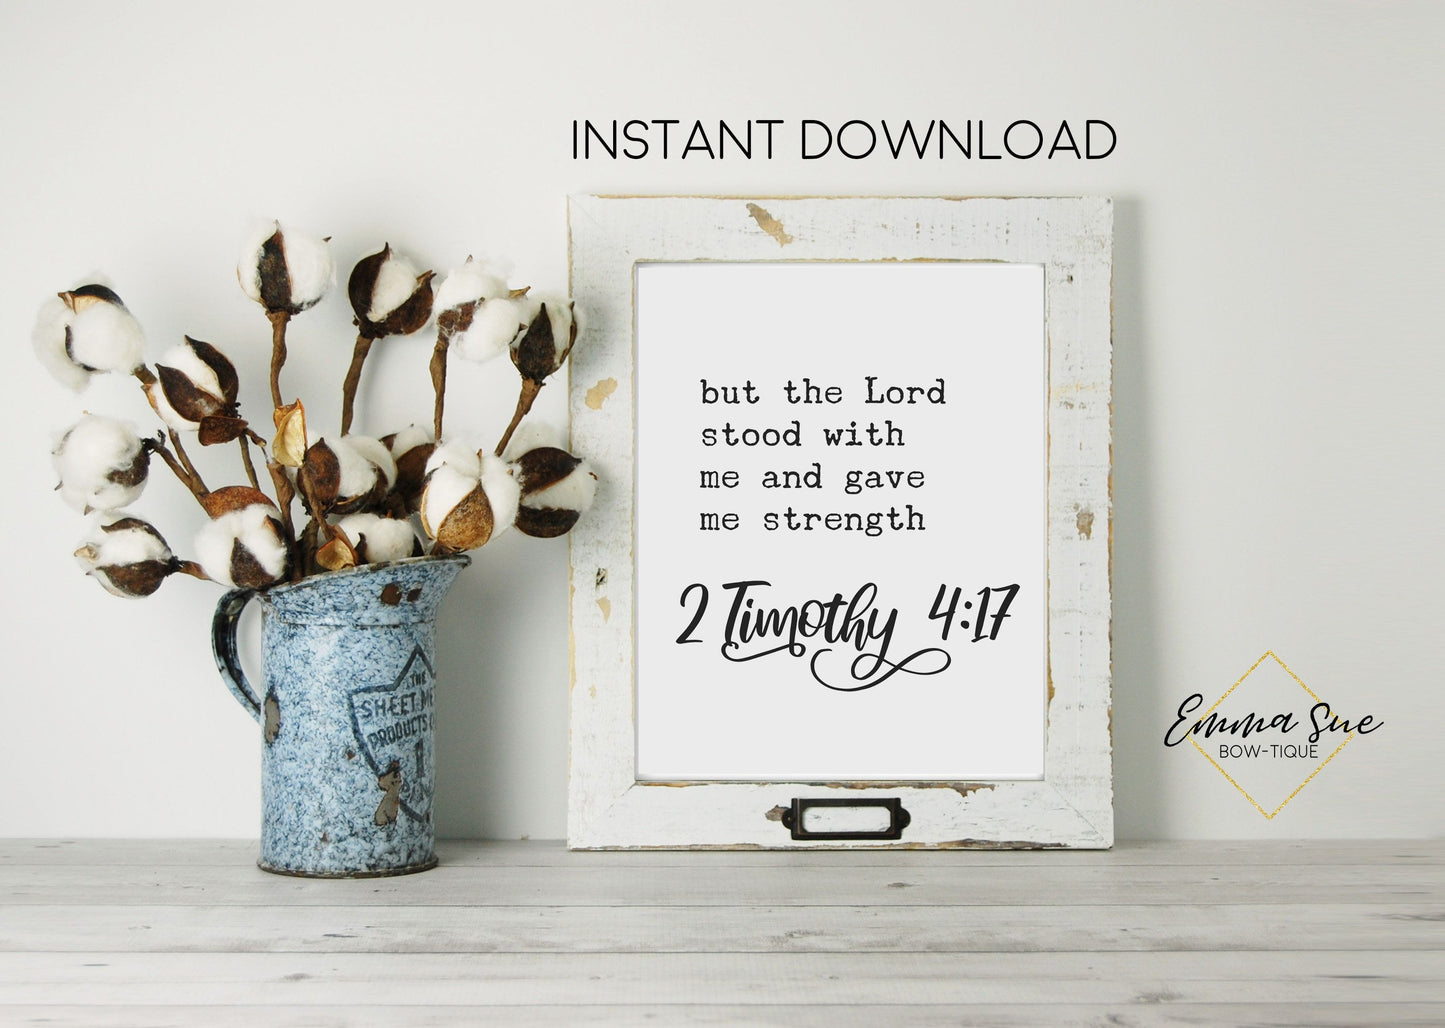 But the Lord stood with me and gave me strength 2 Timothy 4:17 Bible Verse Farmhouse Printable Art Sign